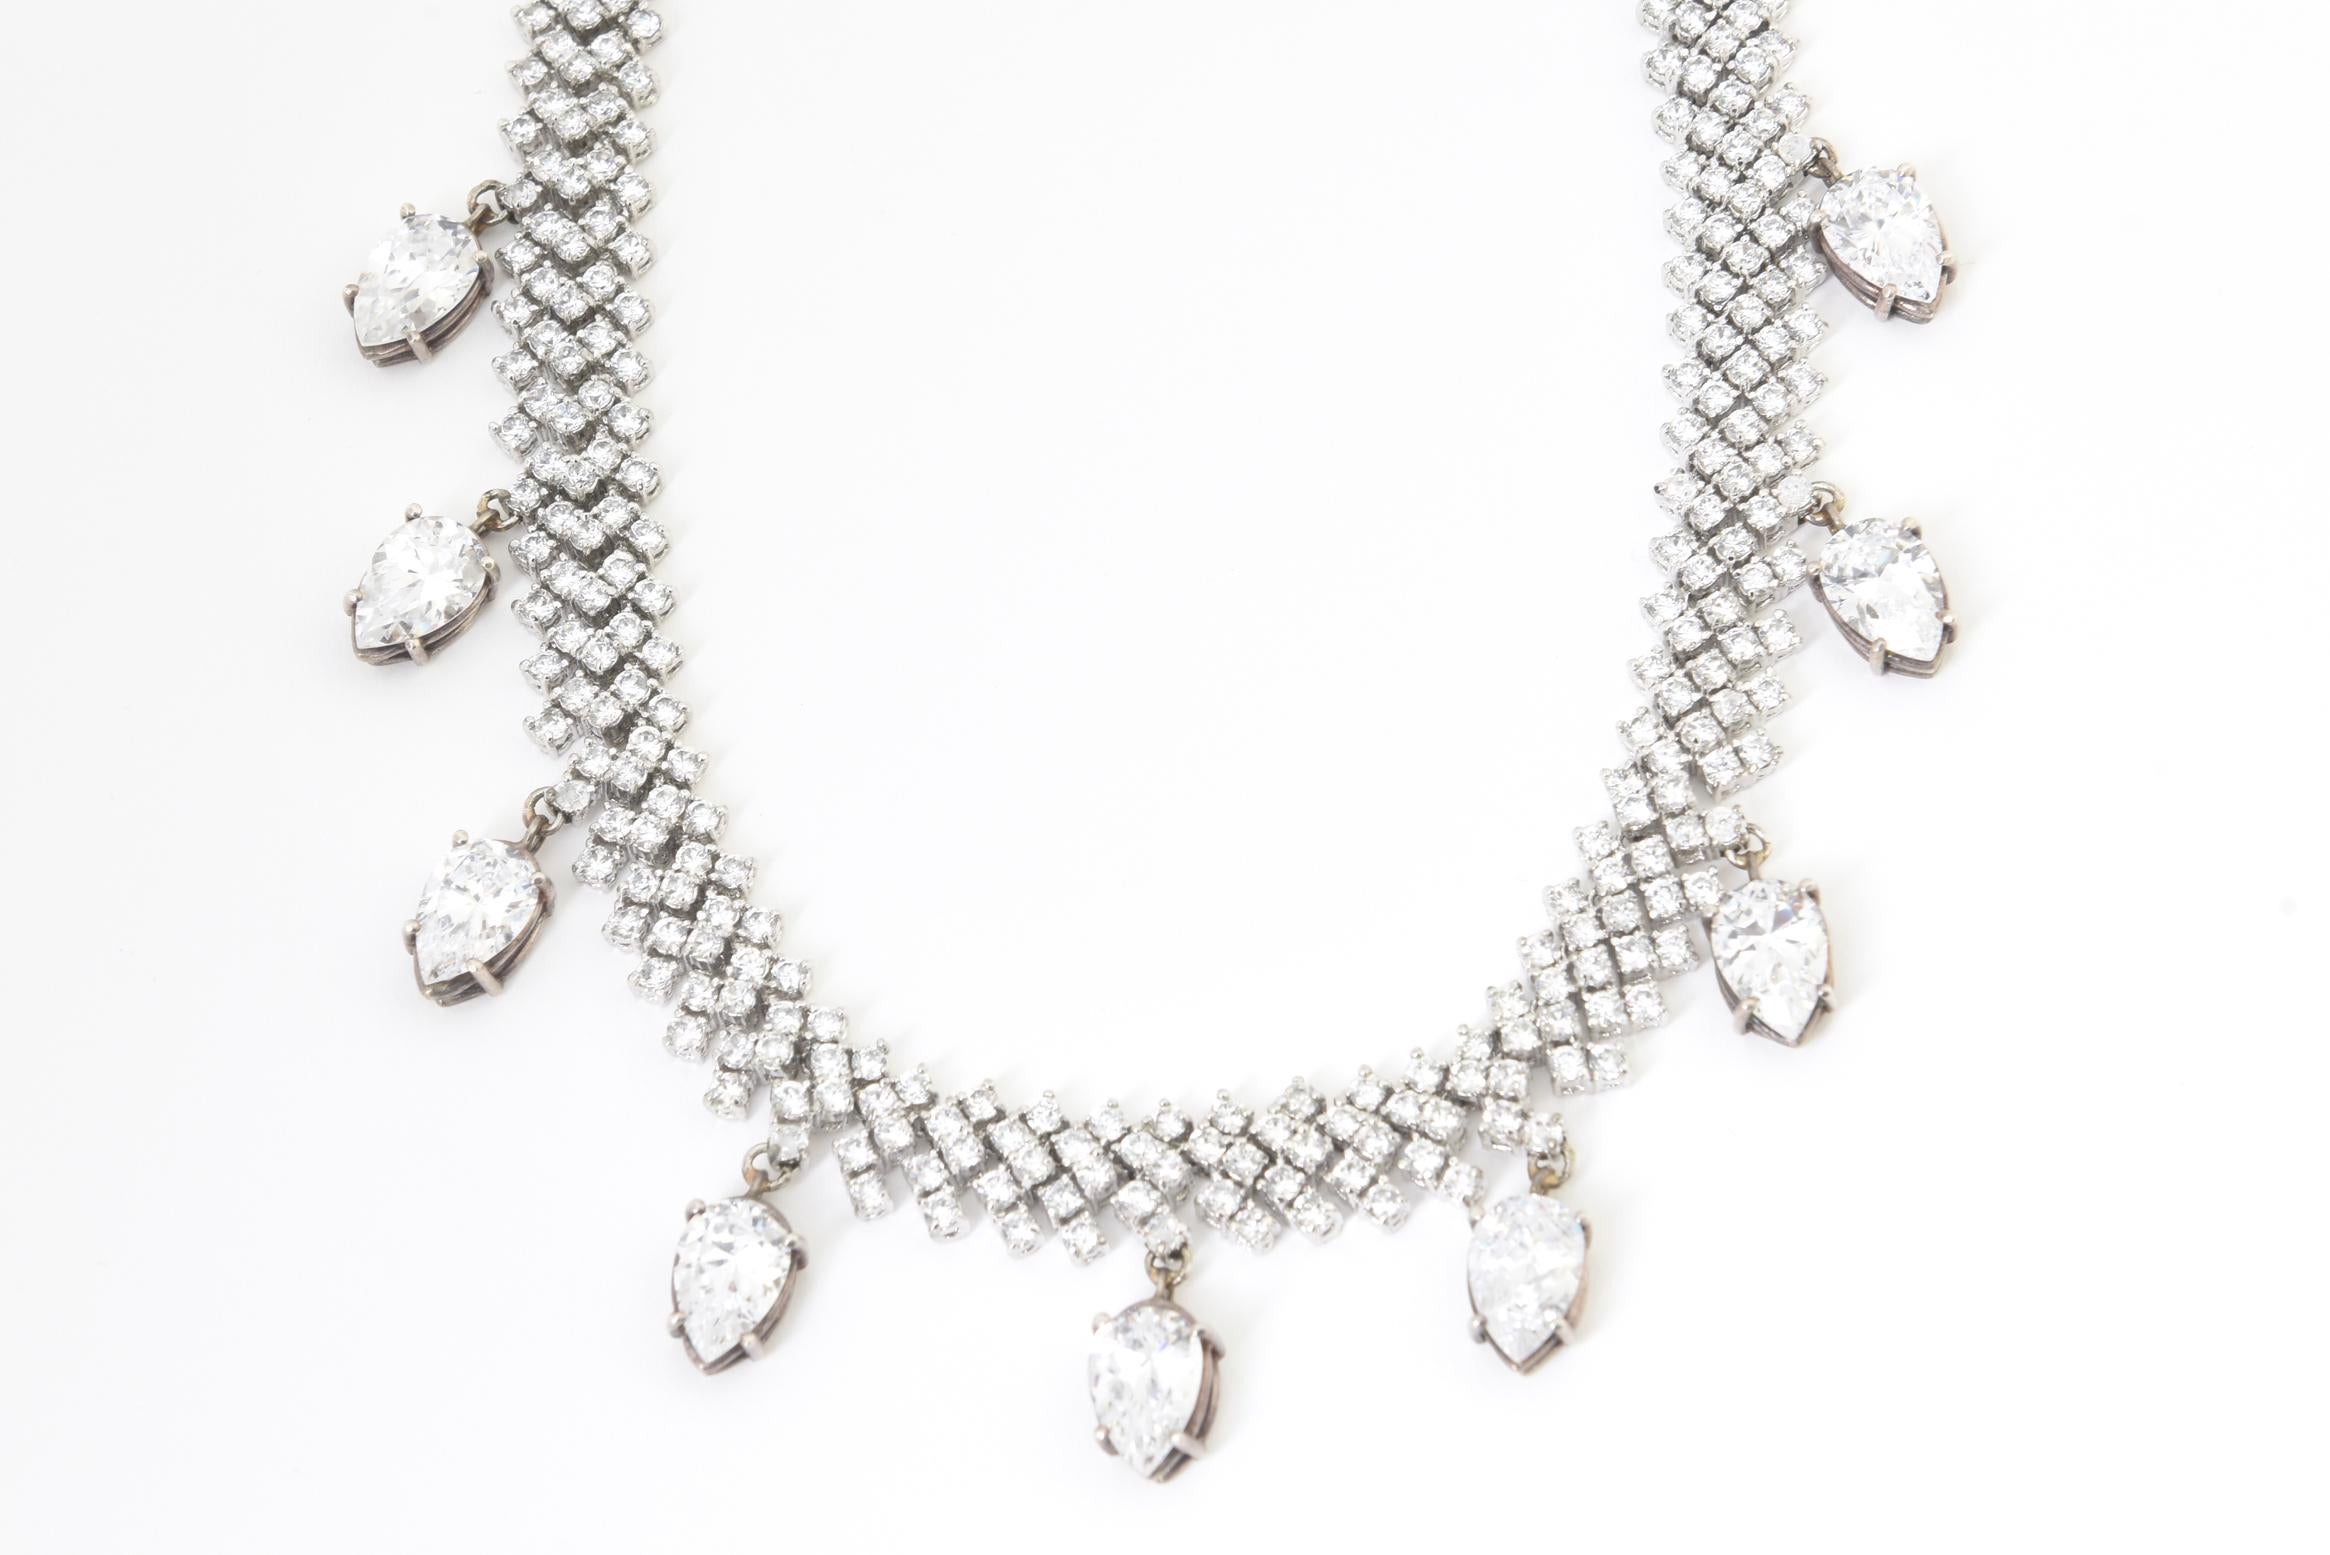 Flexible crystal necklace with nine dangling pear-shaped crystals mounted in white metal. No maker's mark. Minor wear, one pear crystal drop is cracked.
